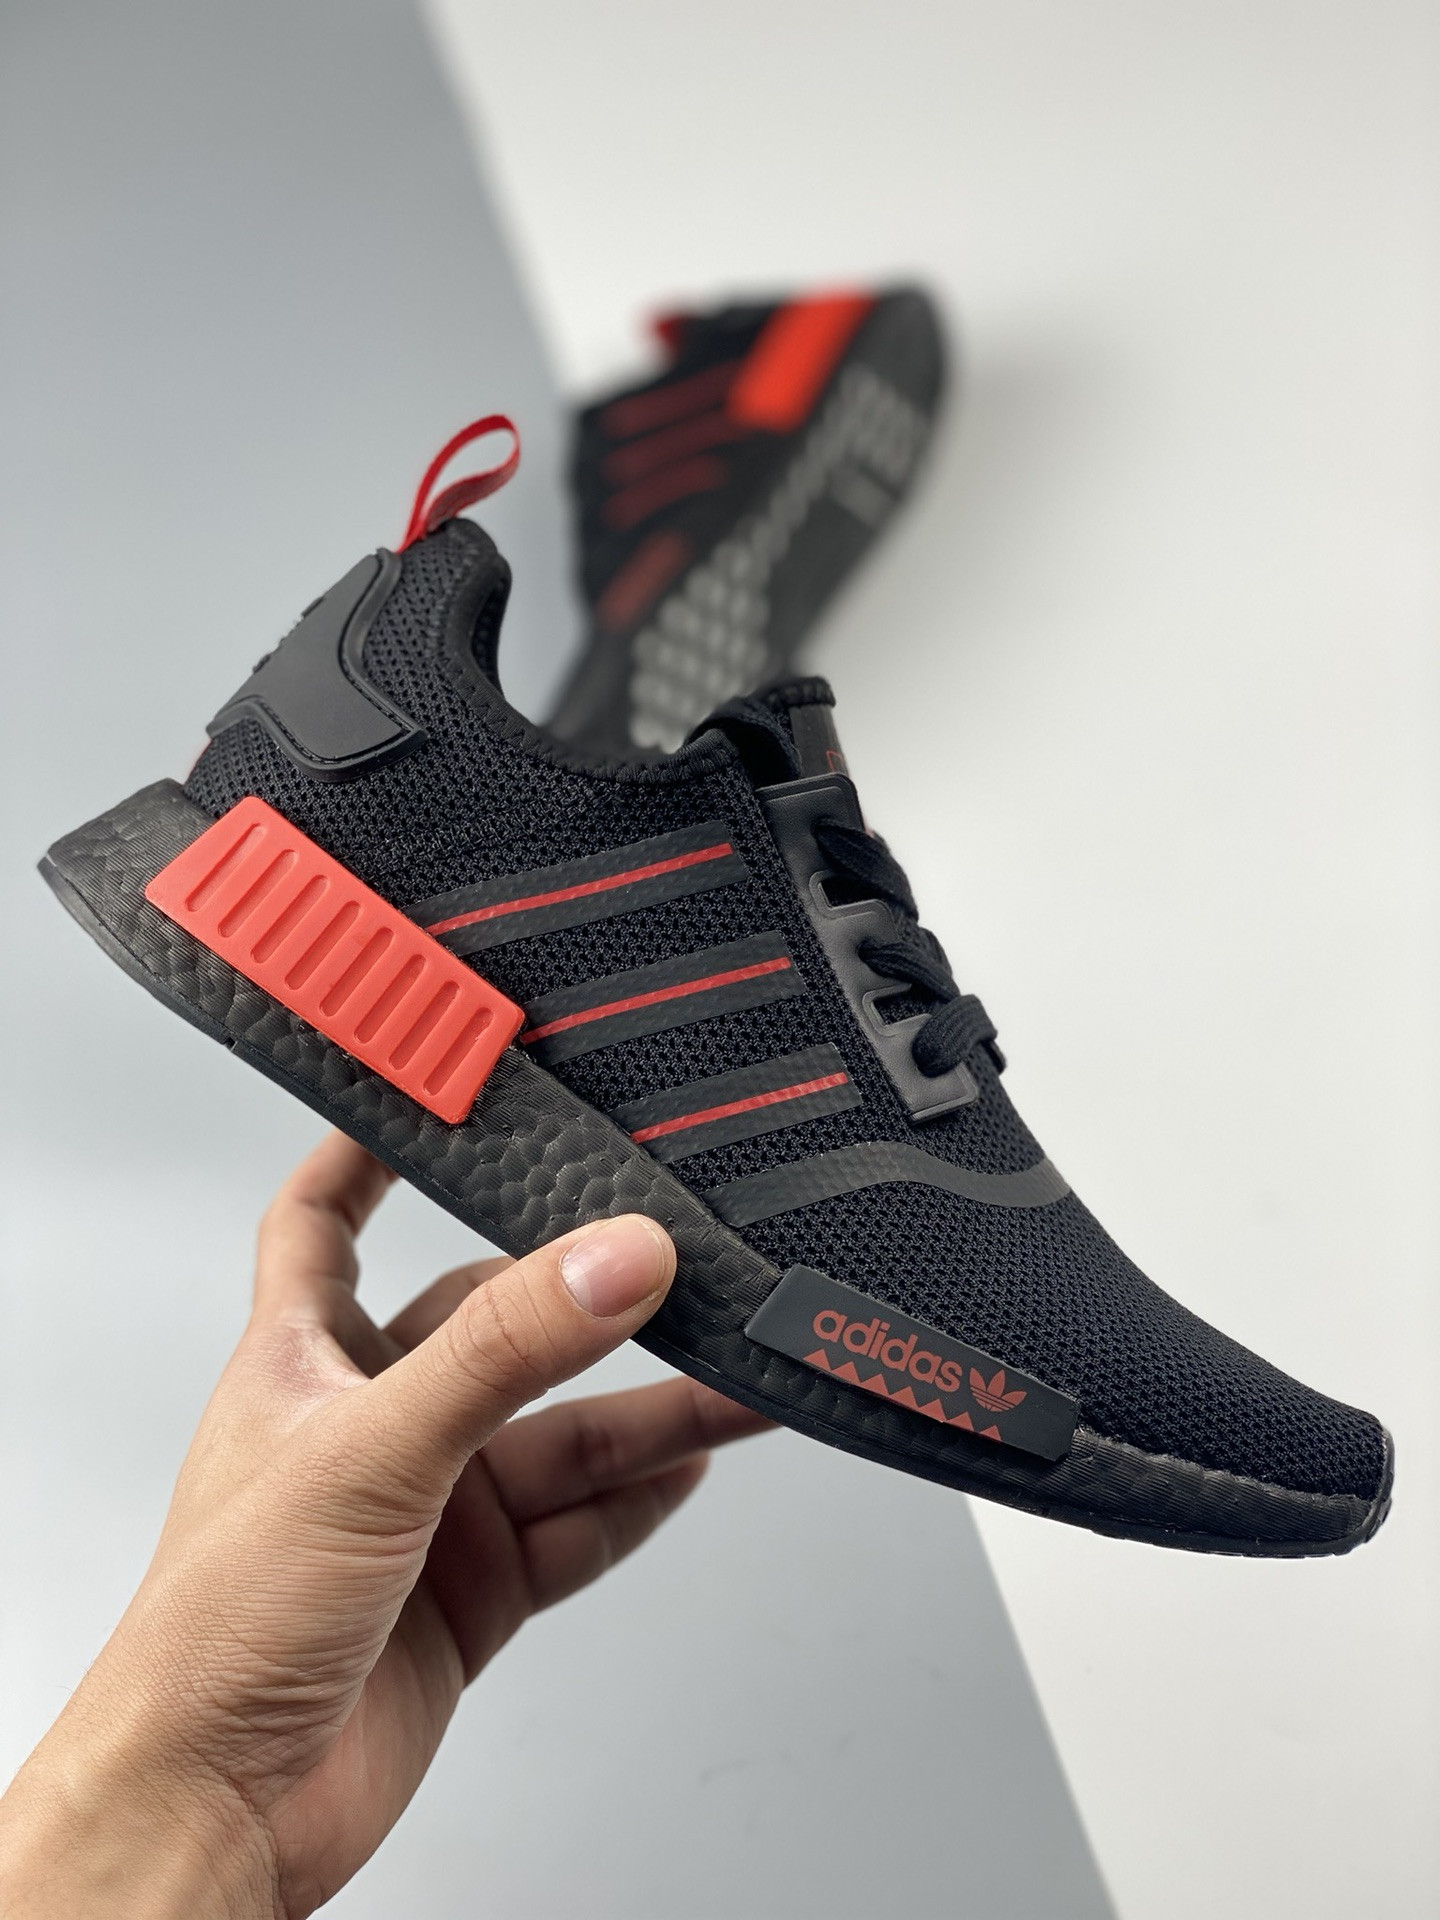 Adidas NMD R1 Core Black Red GV8422 For Sale